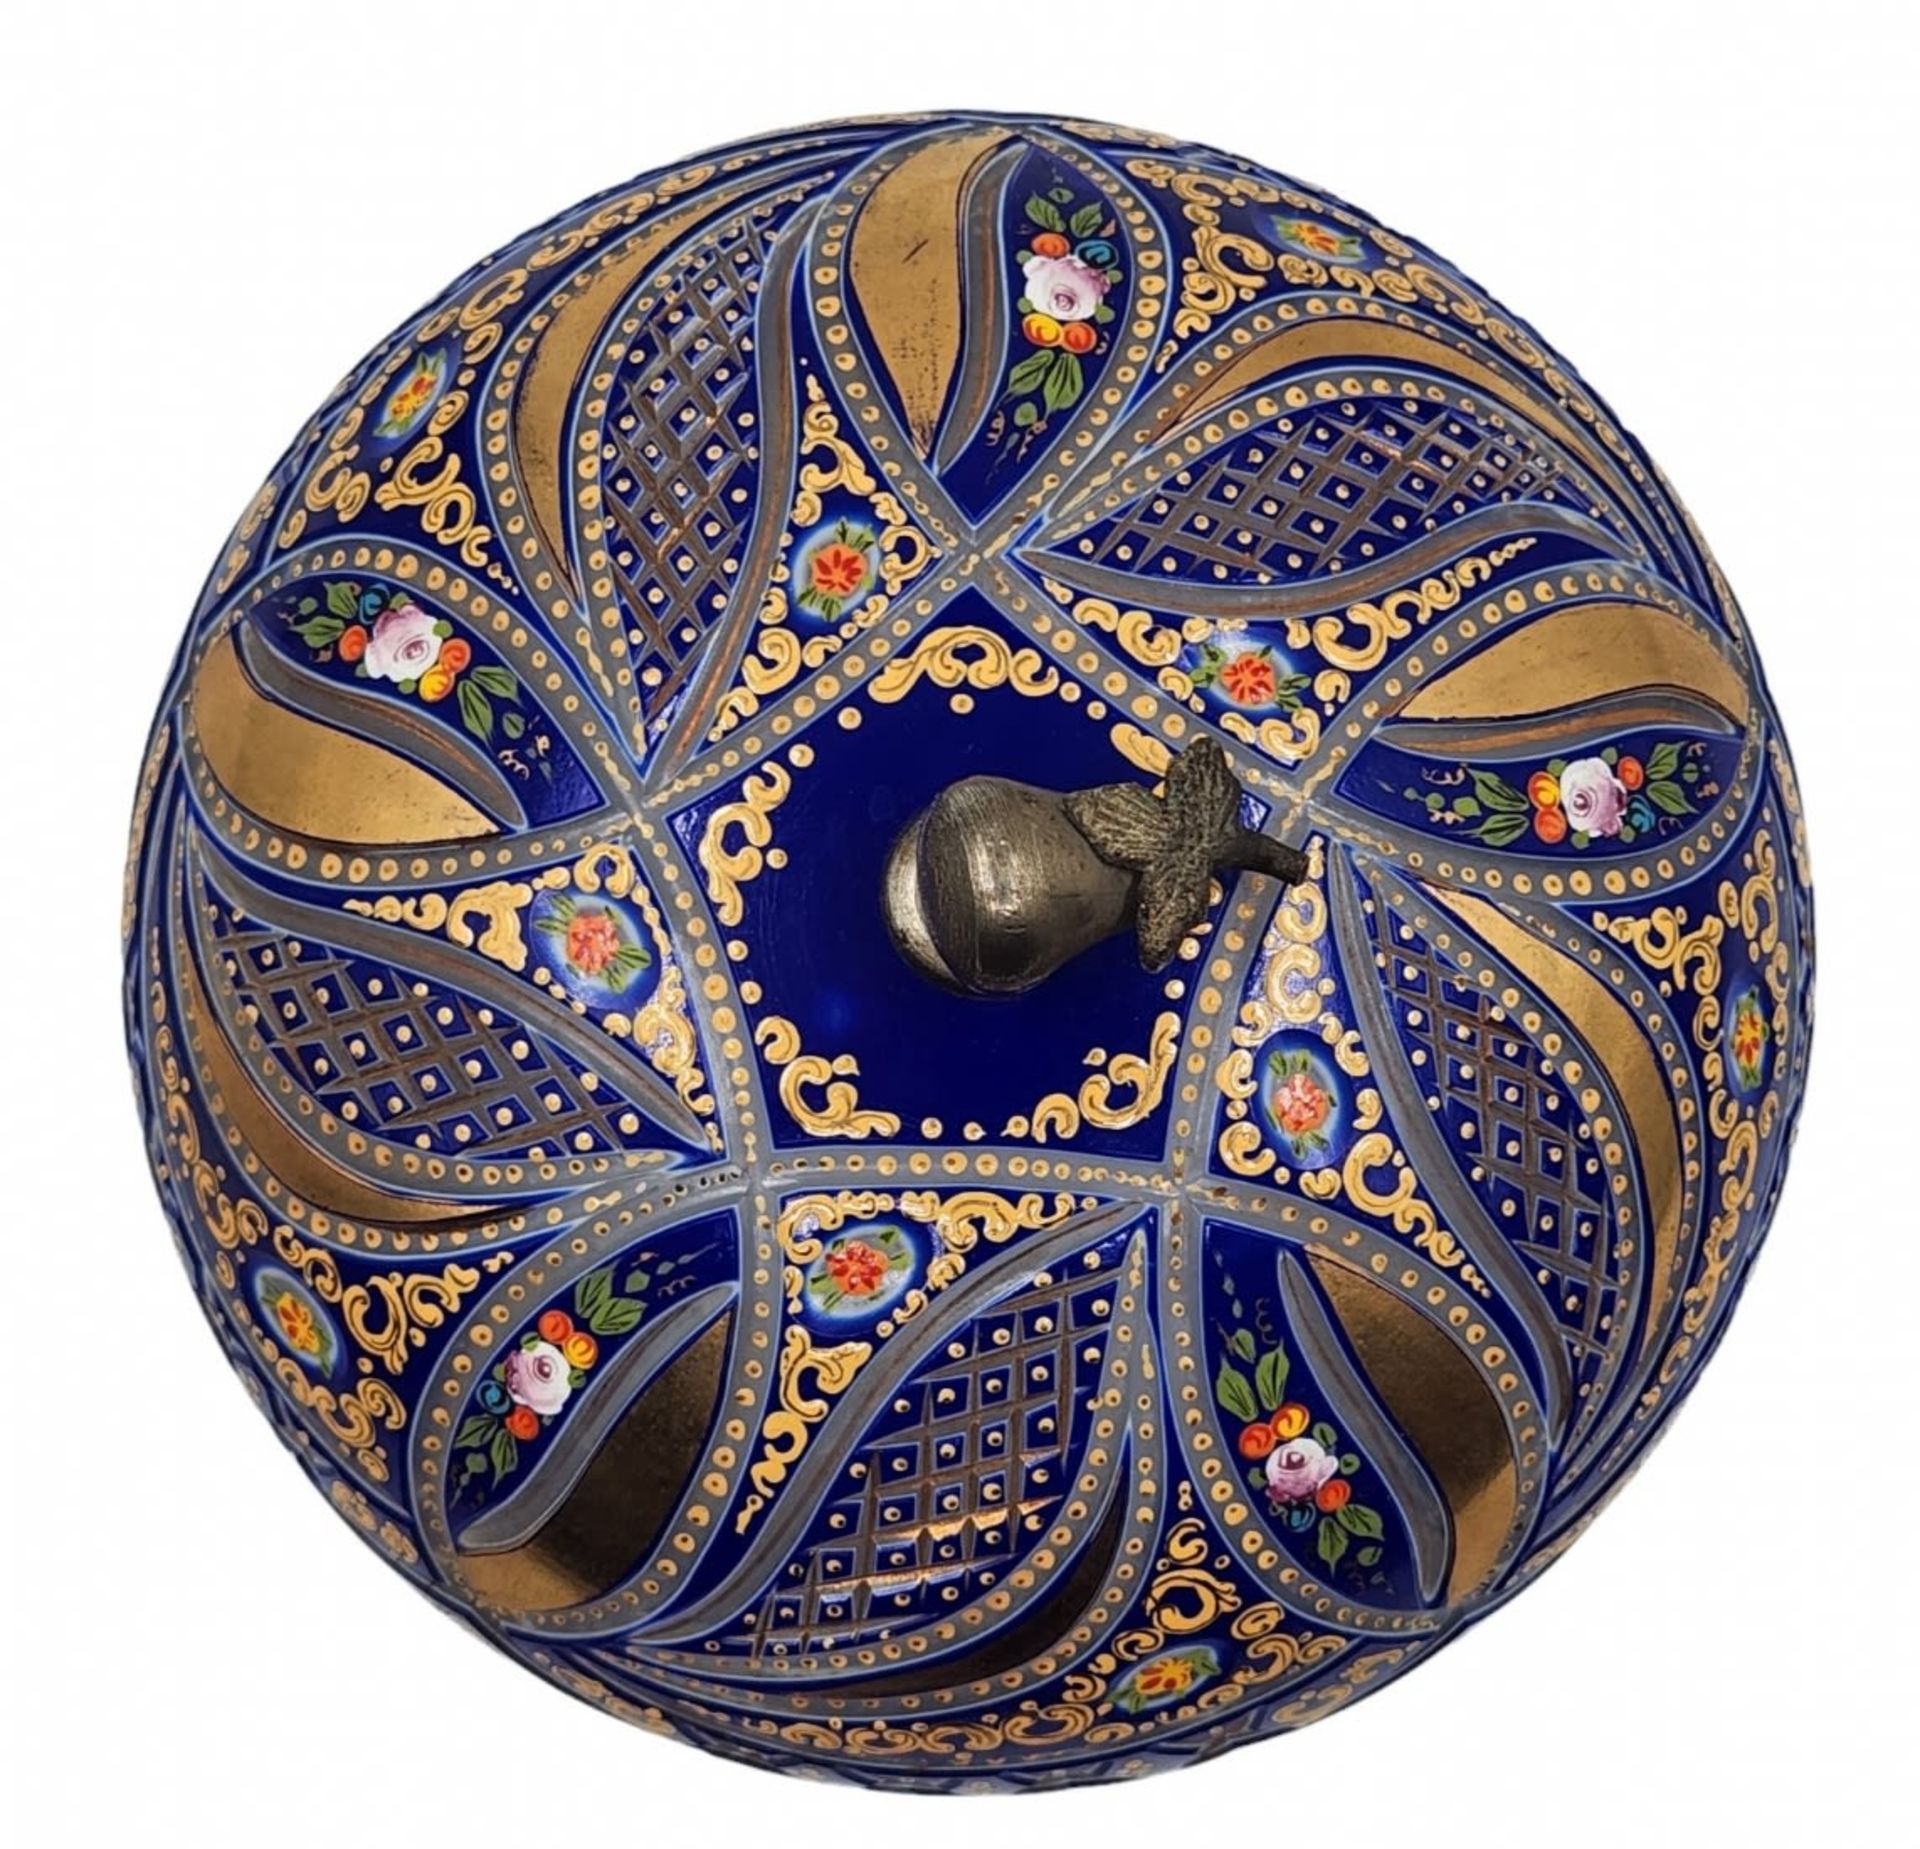 Ancient Bohemian vessel, a very high quality 19th century vessel created for the Ottoman market in - Image 14 of 14